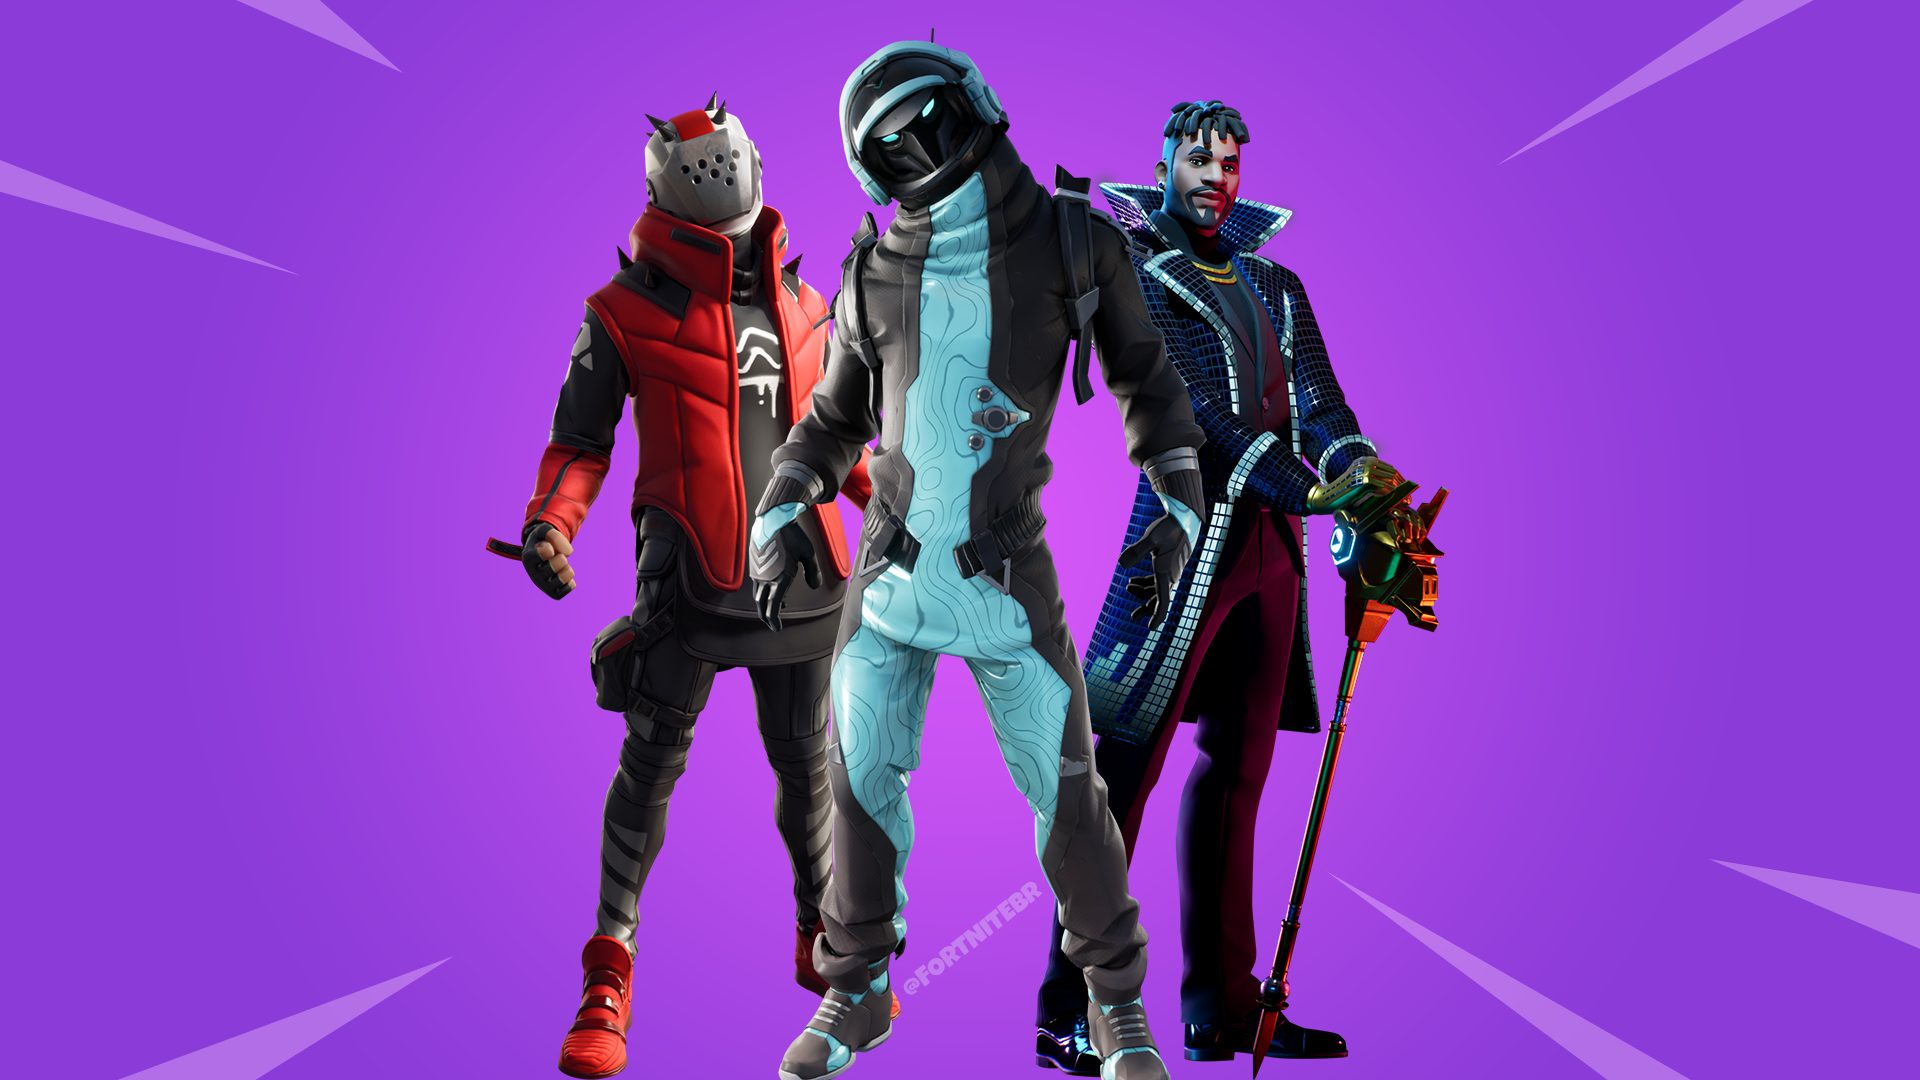 Fortnite Patch v10.00 - All Leaked Cosmetics (Skins, Emotes, Gliders, Wraps)